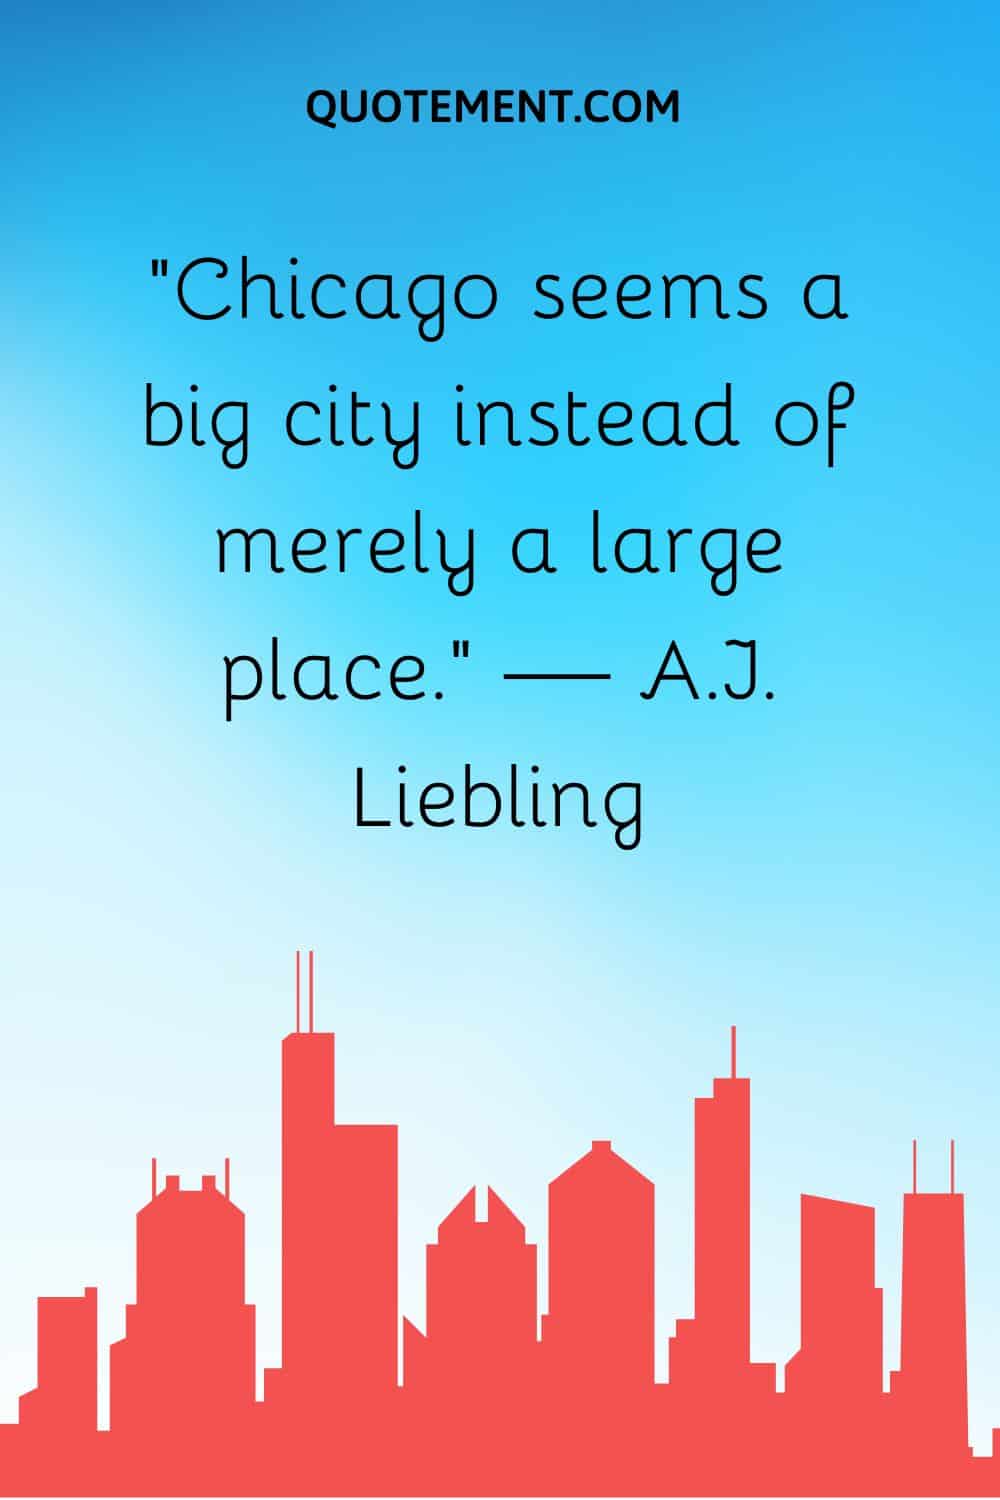 “Chicago seems a big city instead of merely a large place.” — A.J. Liebling